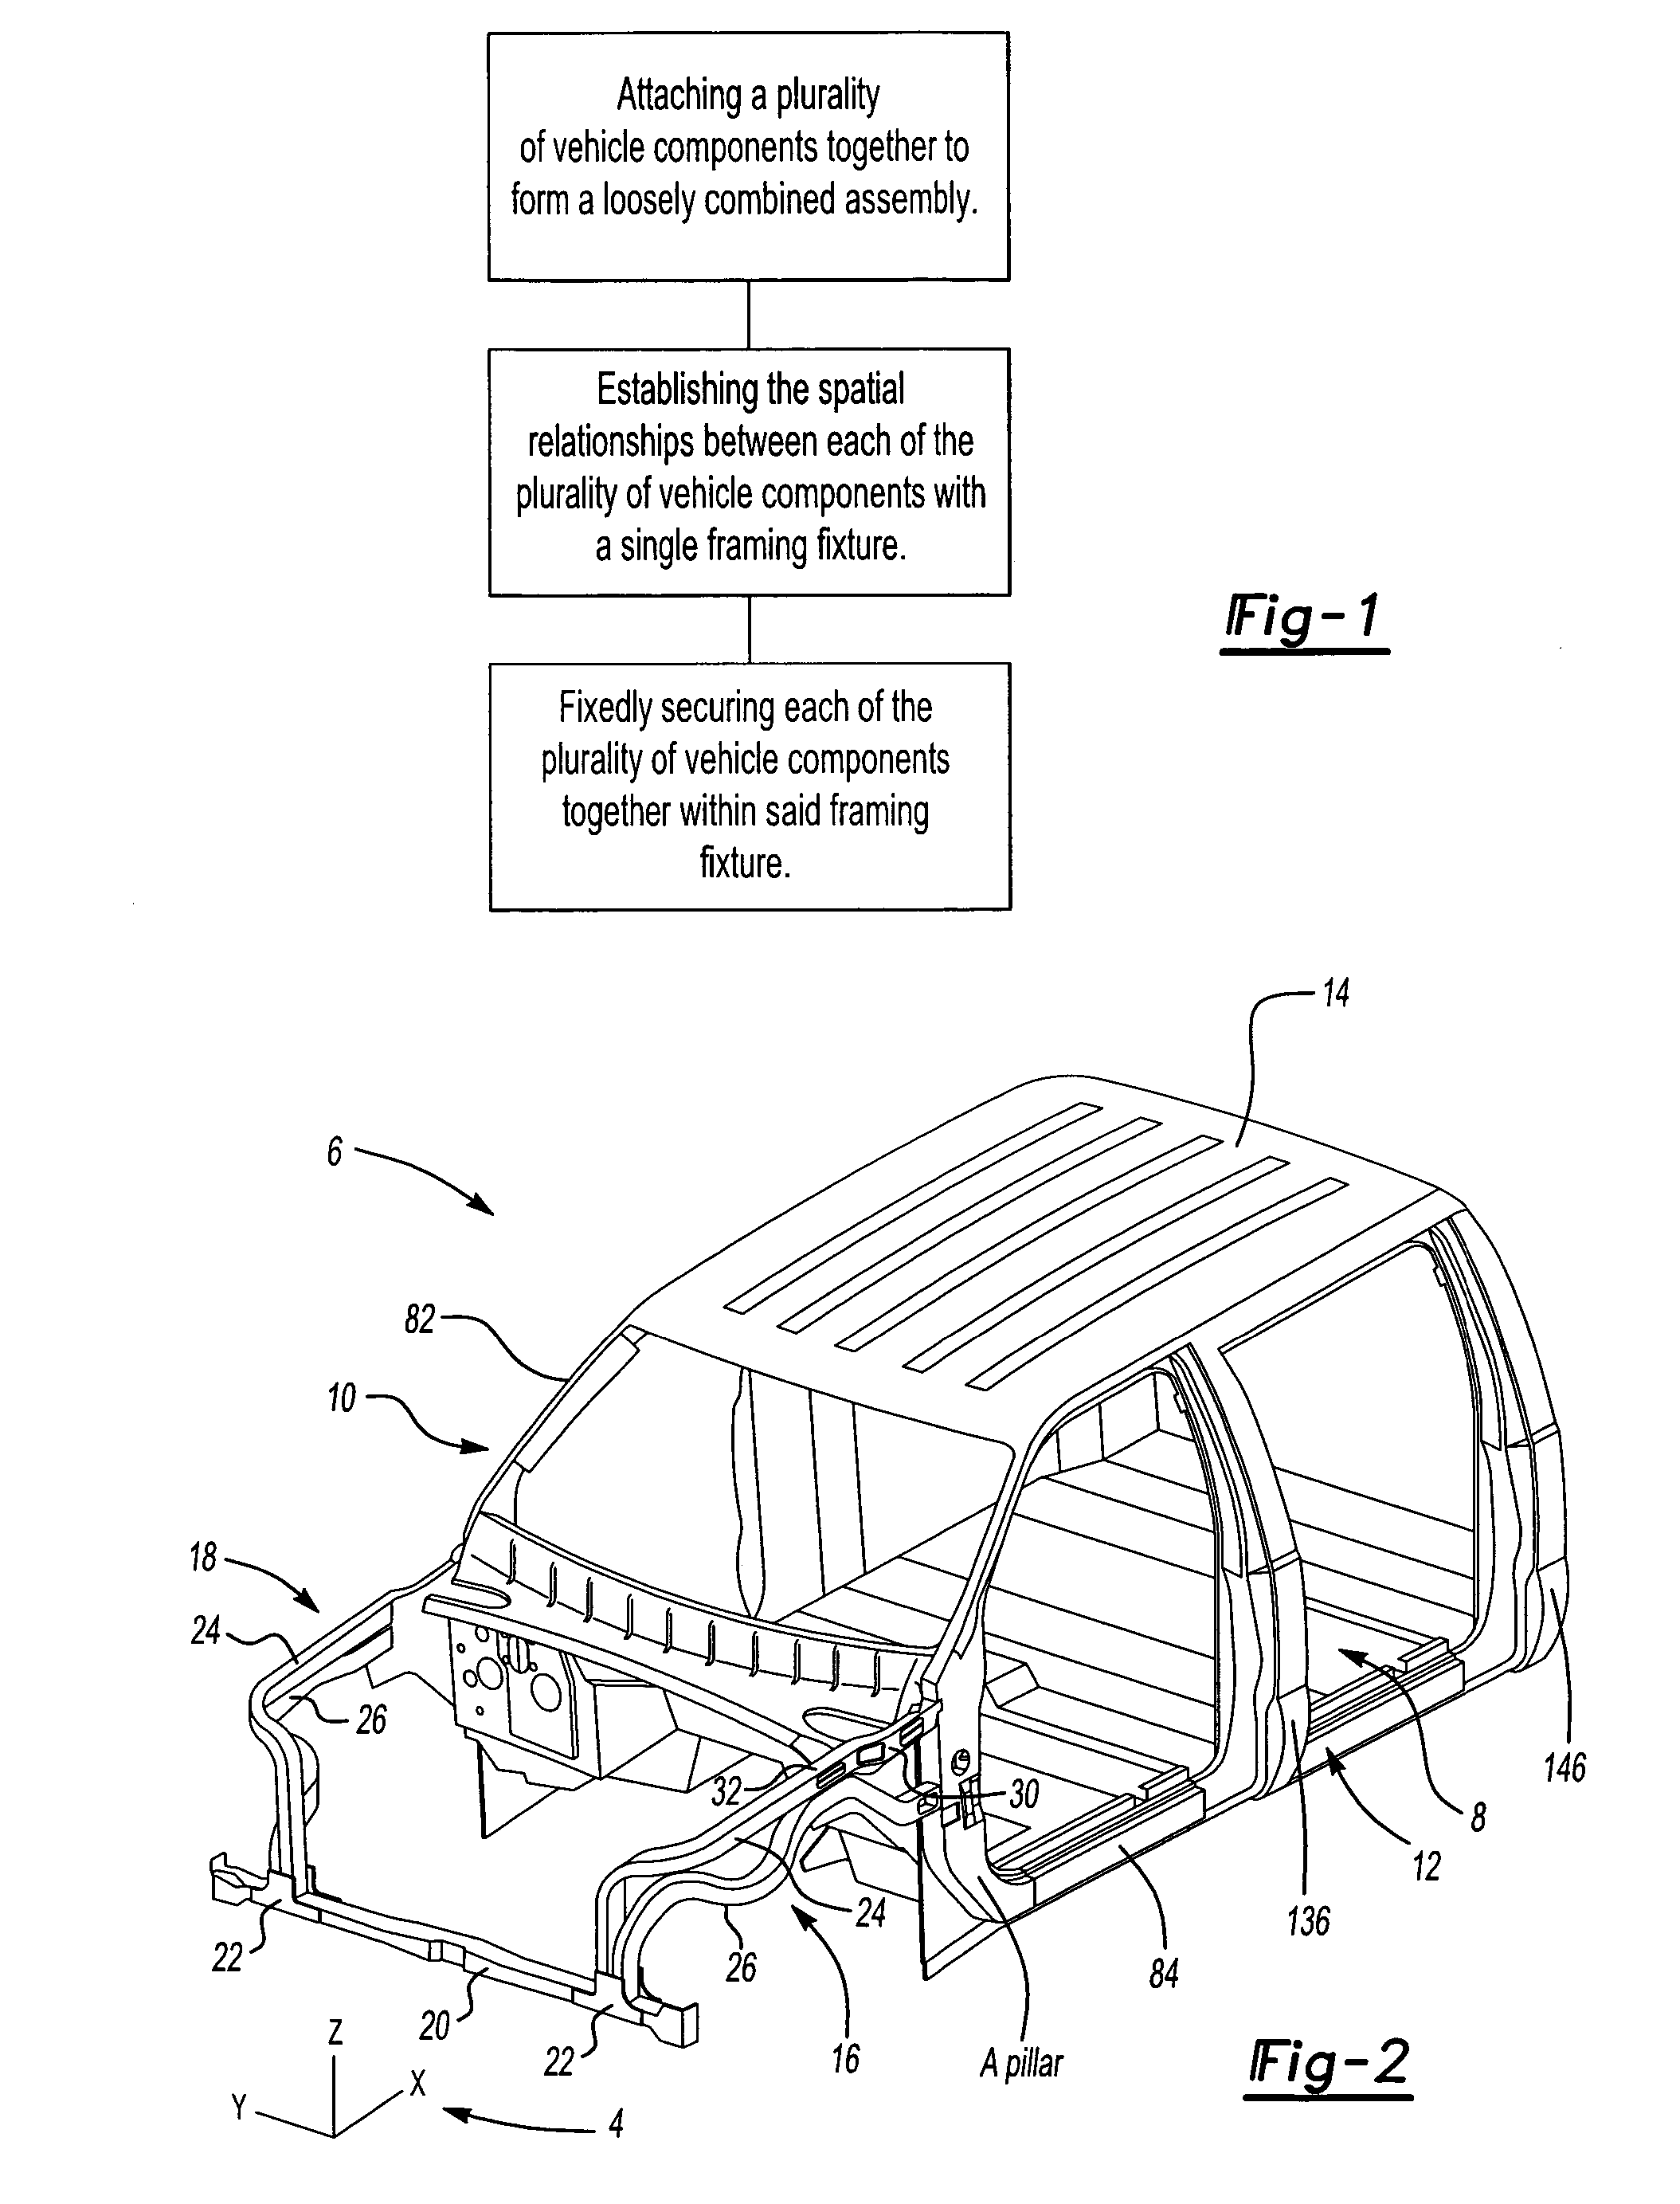 Single set geometry method for assembly of a vehicle